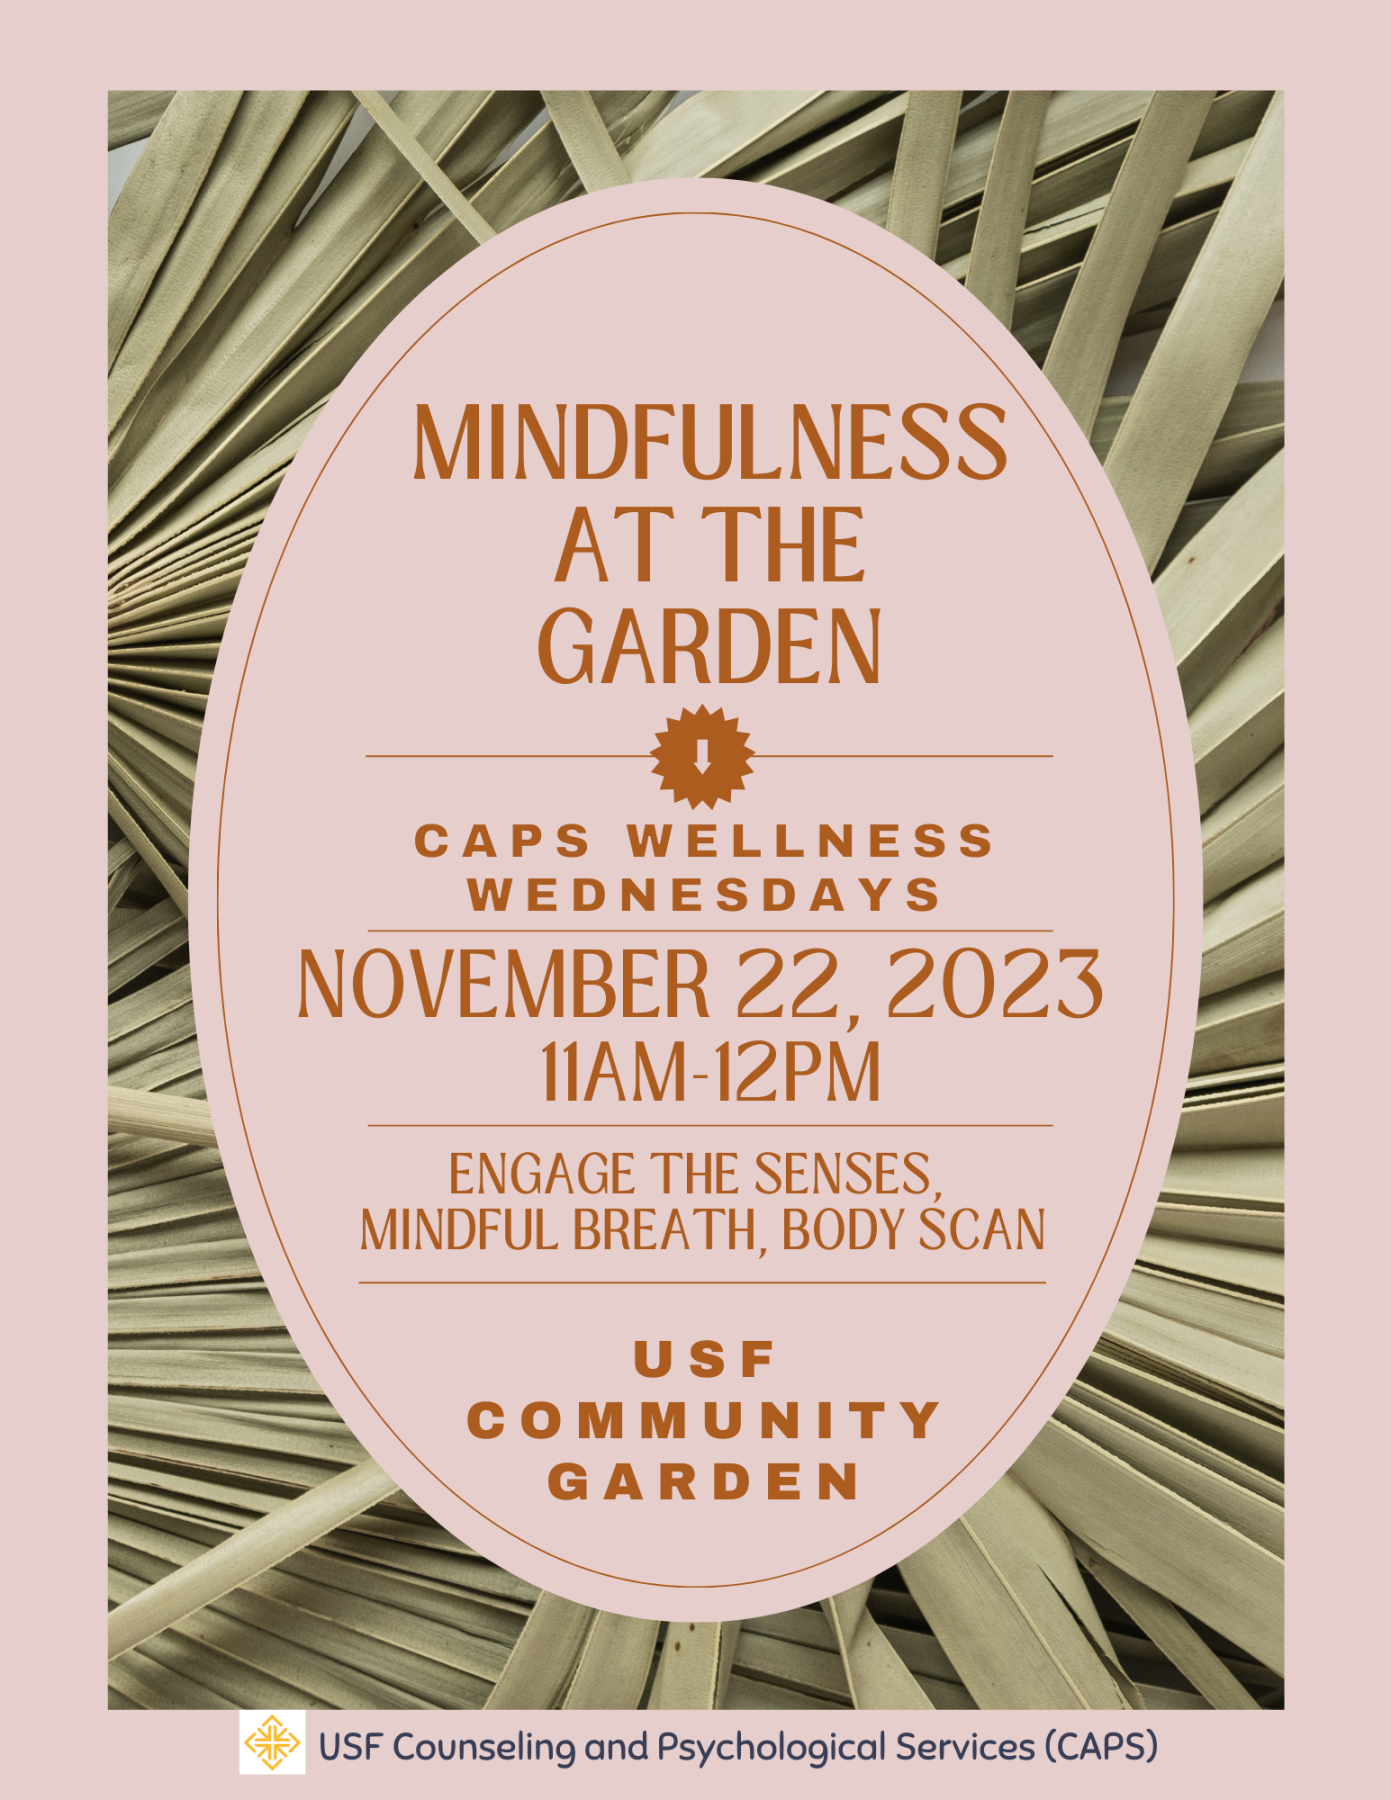 Wellness Wednesday Flyer for 11/22/2023 at the USF Community Garden, 11am-12pm